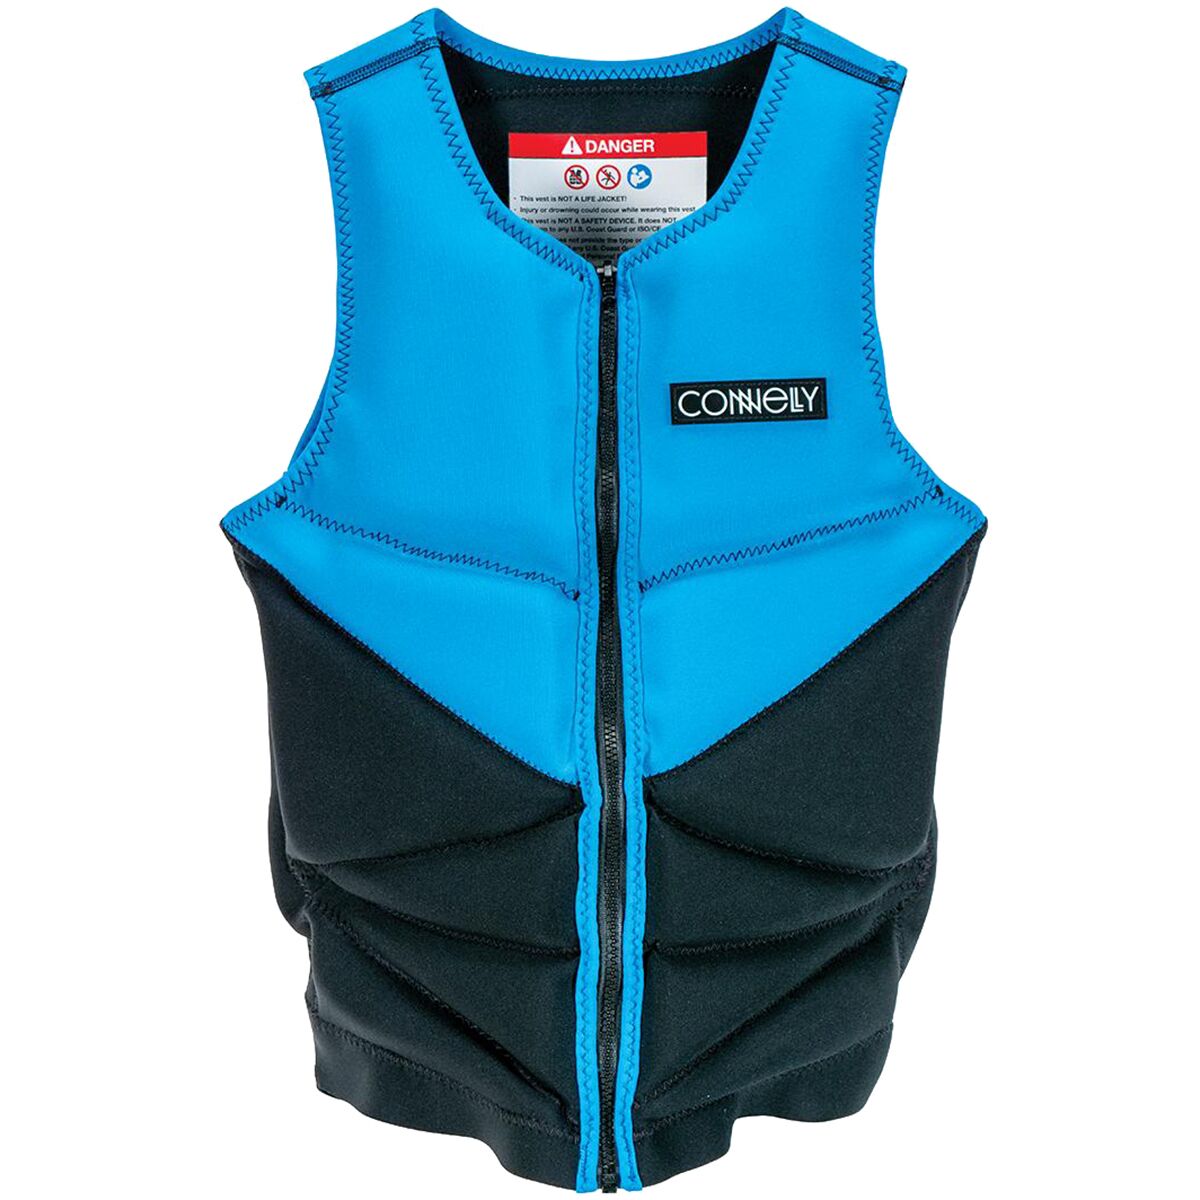 Connelly Skis Reverb Neo Compitition Vest - Men's